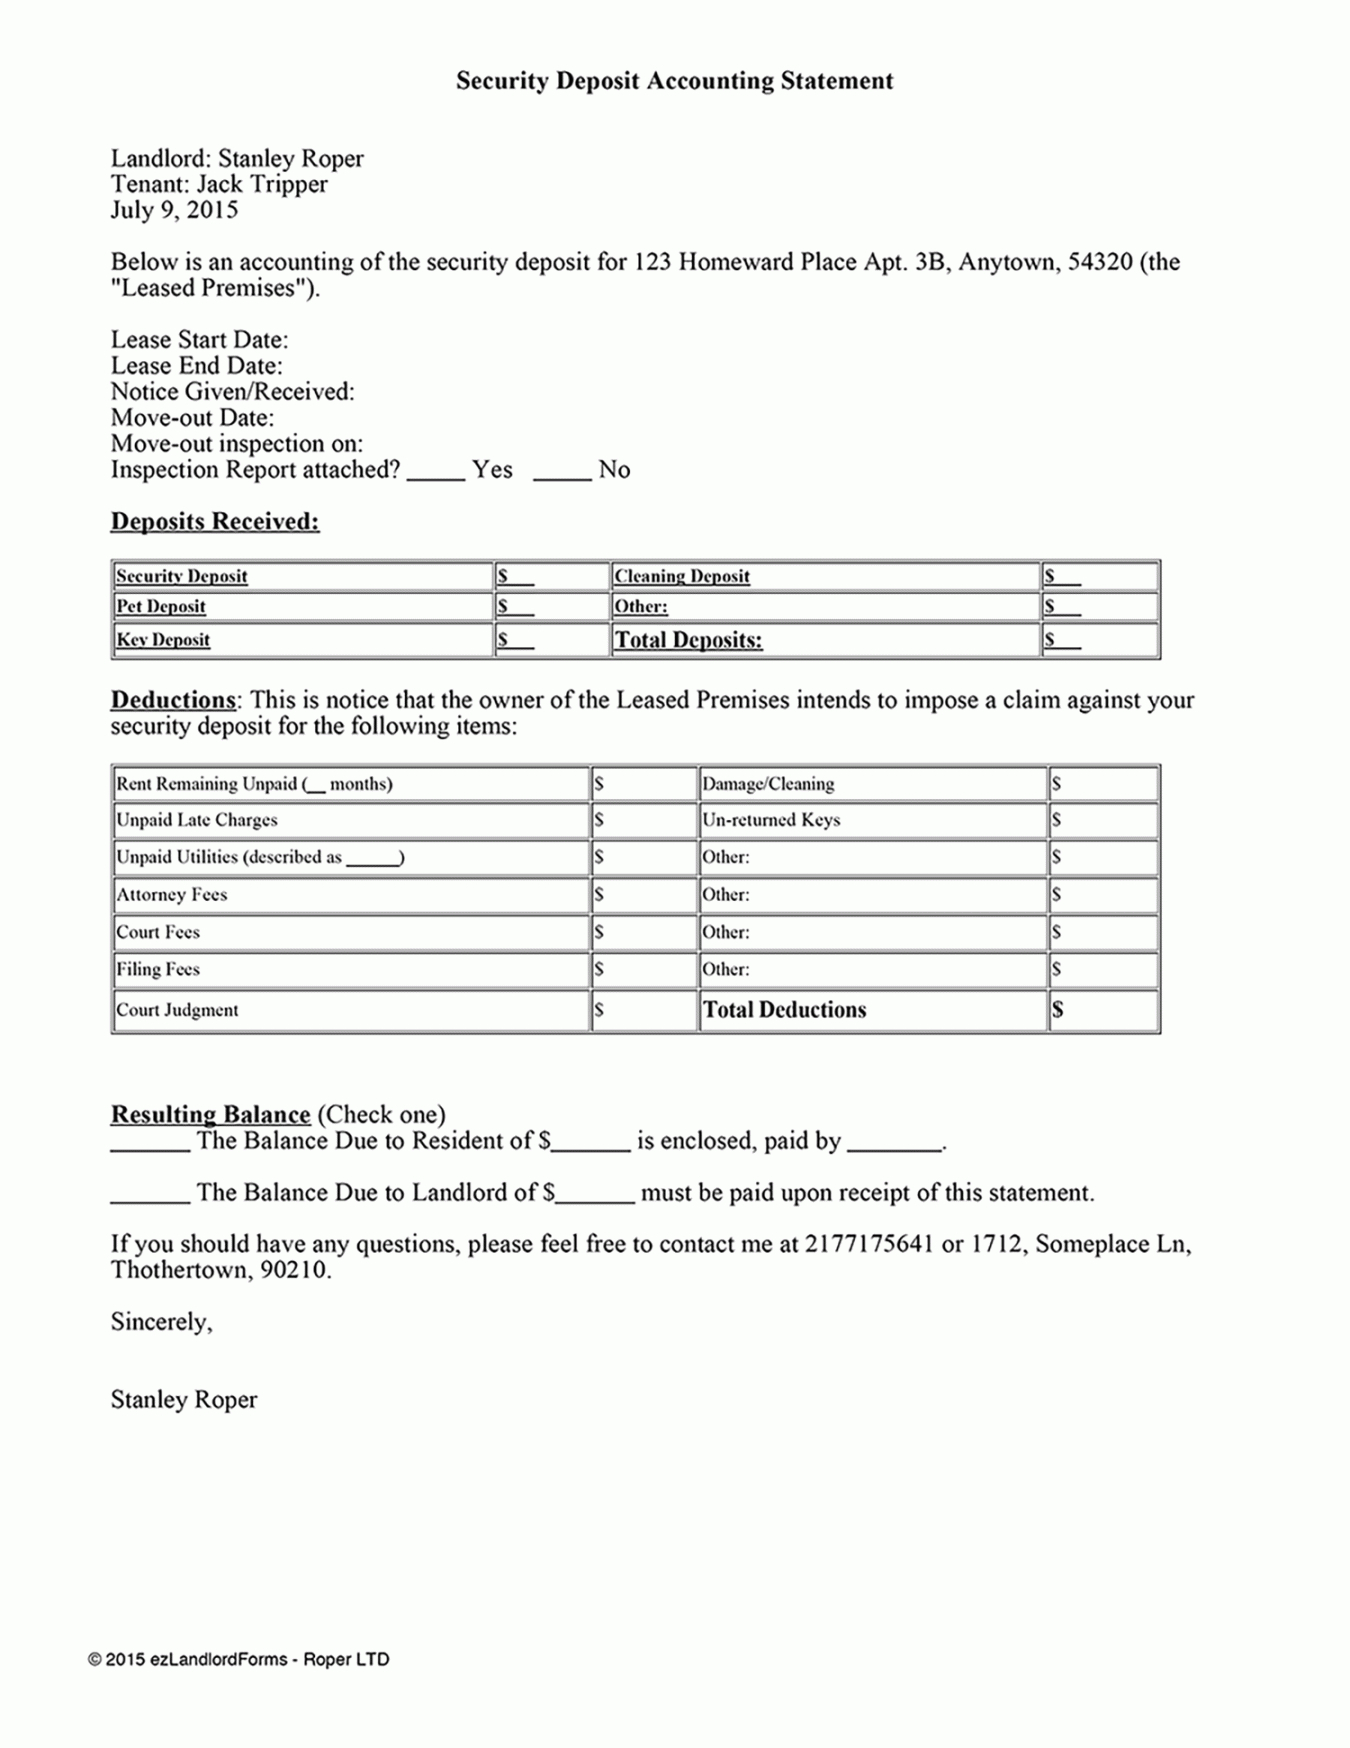 printable security deposit accounting statement  ezlandlordforms itemized security deposit deduction form